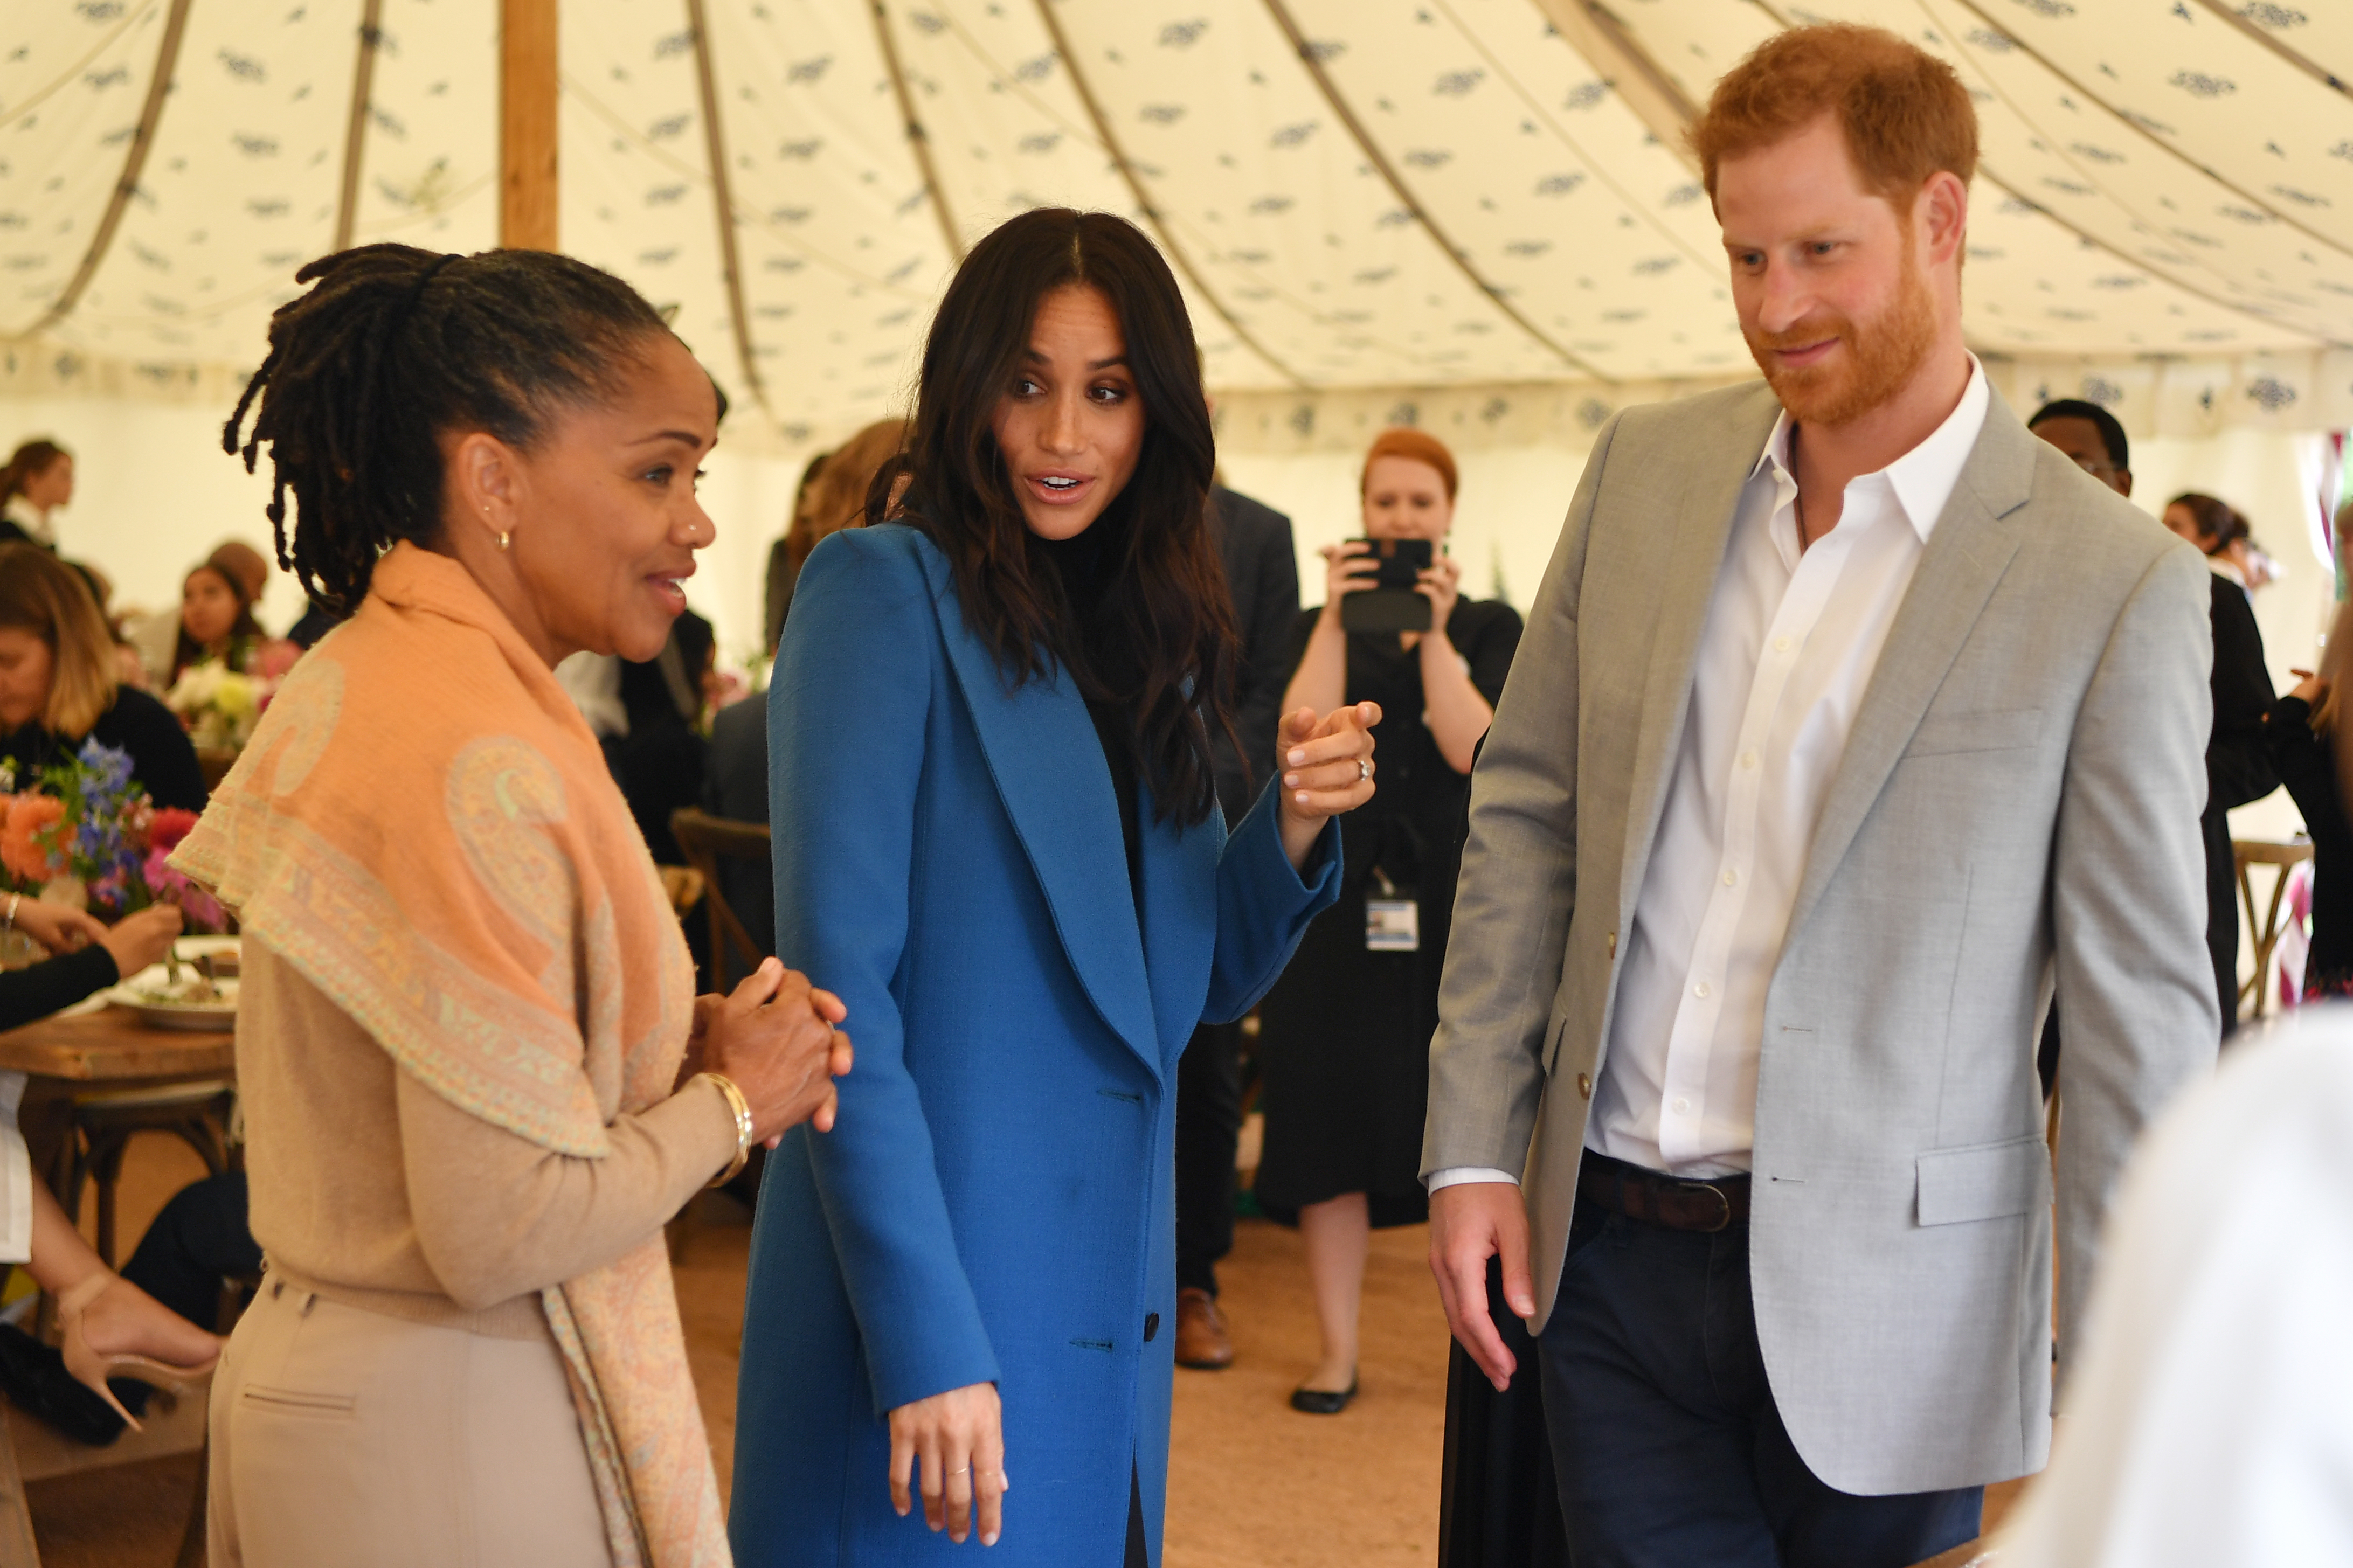 Doria Ragland, Meghan Markle, and Prince Harry at the "Together" cookbook launch in London, England on September 20, 2018 | Source: Getty Images